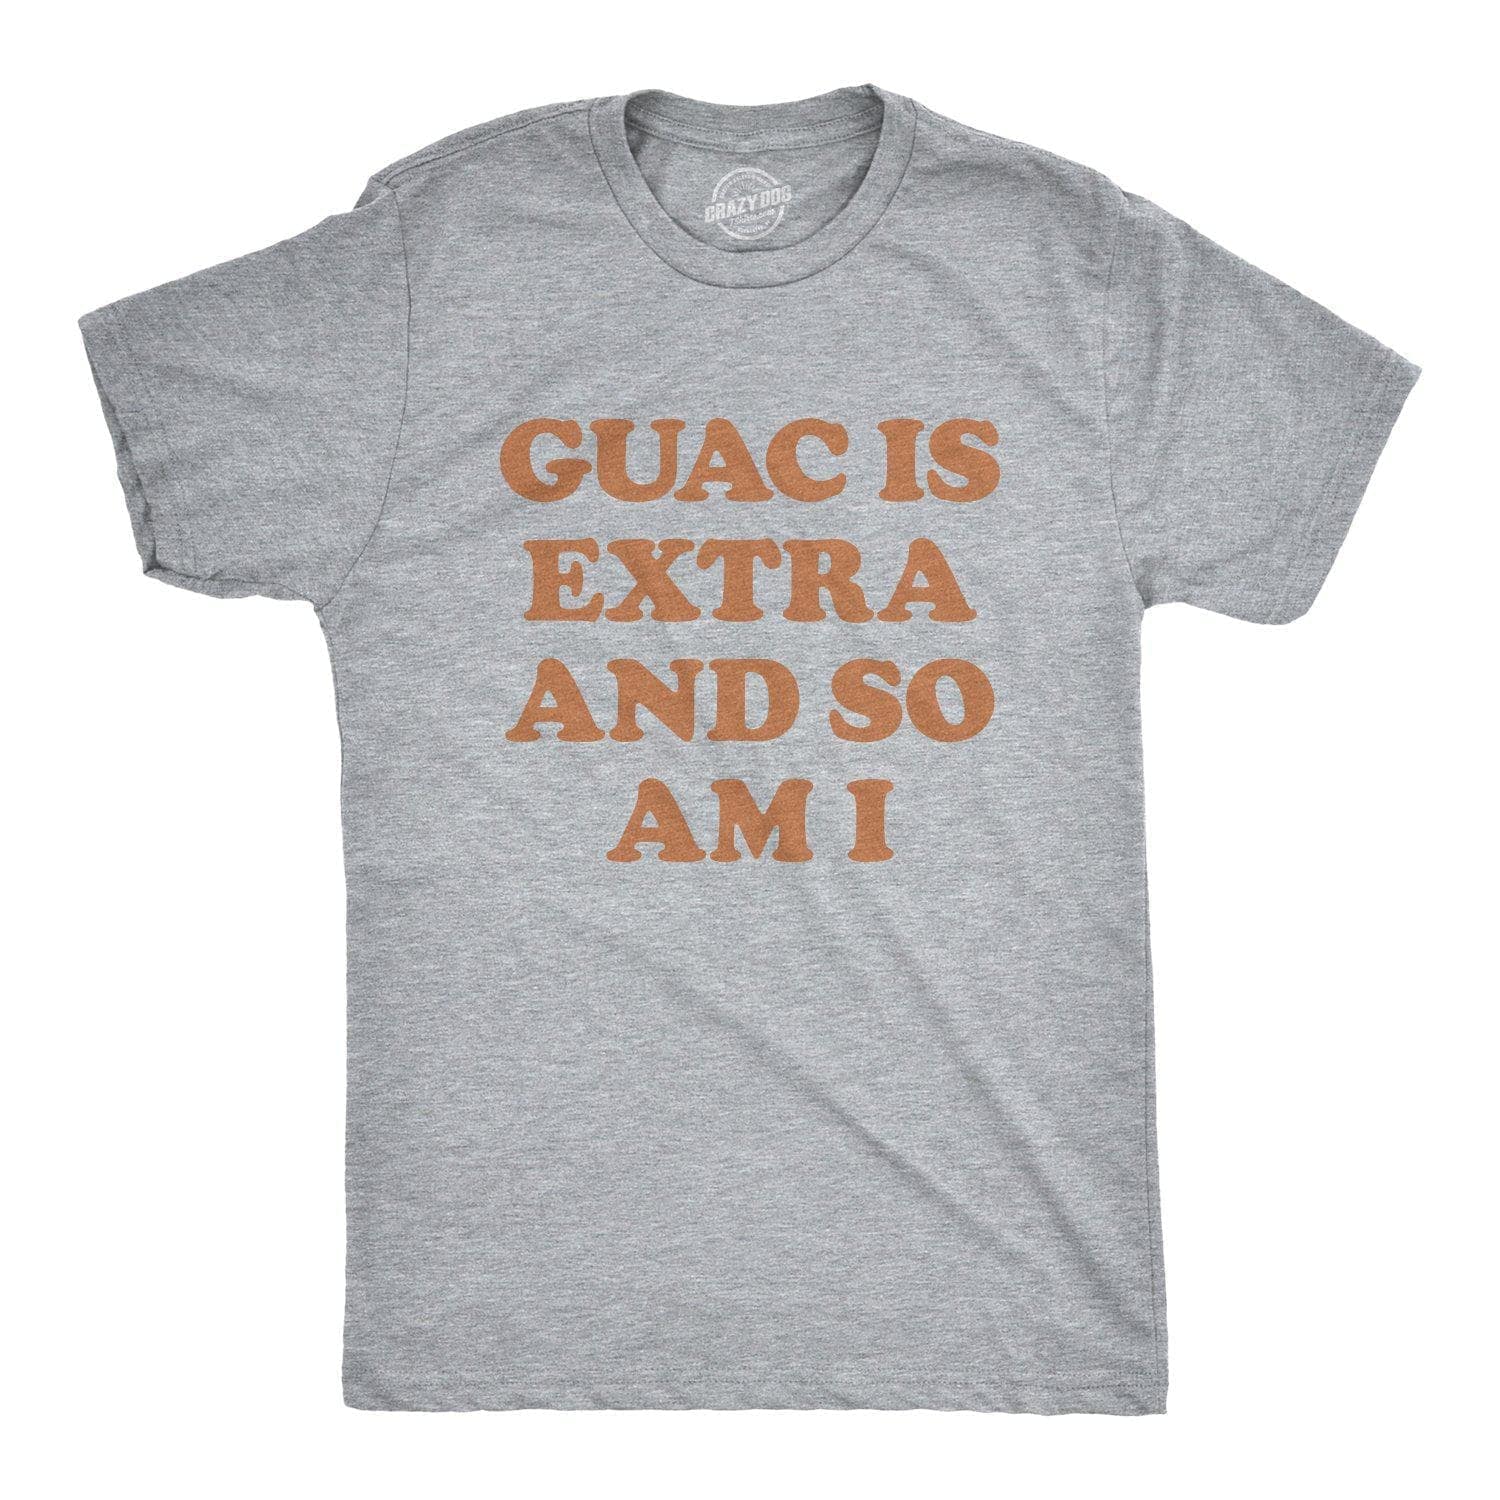 Guac Is Extra And So Am I Men's Tshirt  -  Crazy Dog T-Shirts